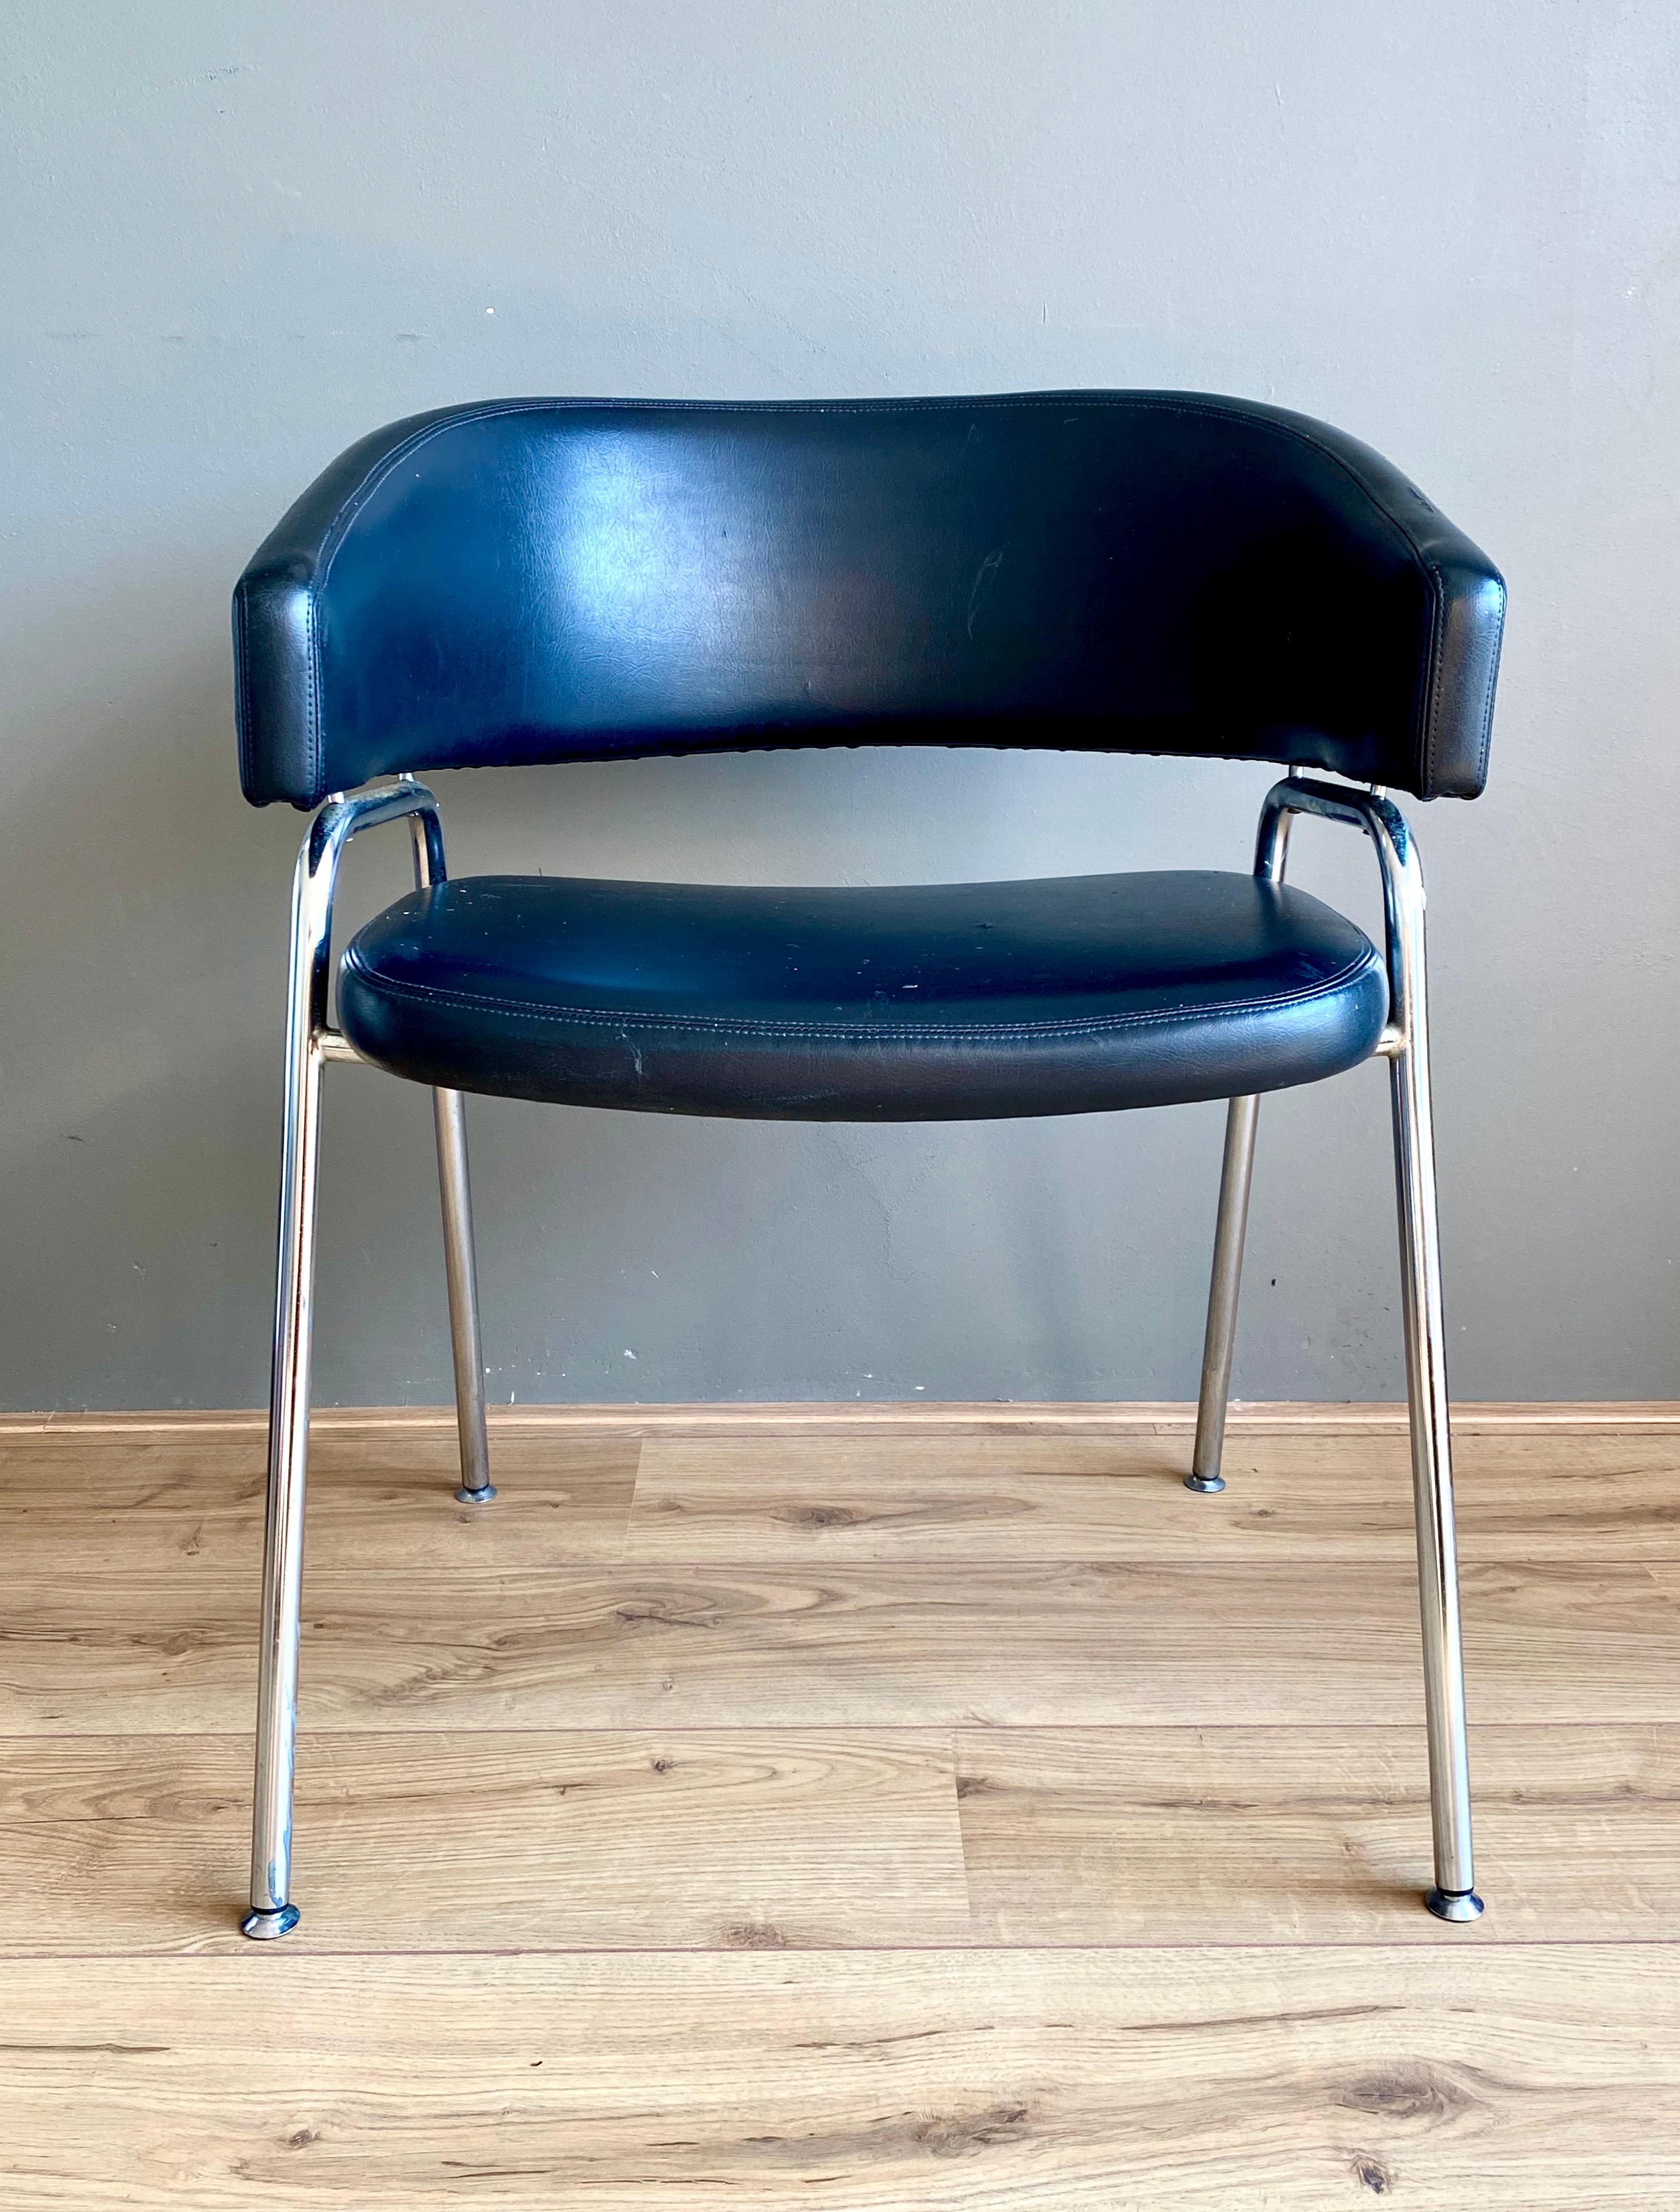 Rare armchair, Model AP22, designed by Hein Salomonson and Theo Tempelman in 1960. The chair was manufactured by AP Originals, originally for the RAI restaurant Amsterdam. The chair features a Chromed metal base and the original Black Leatherette